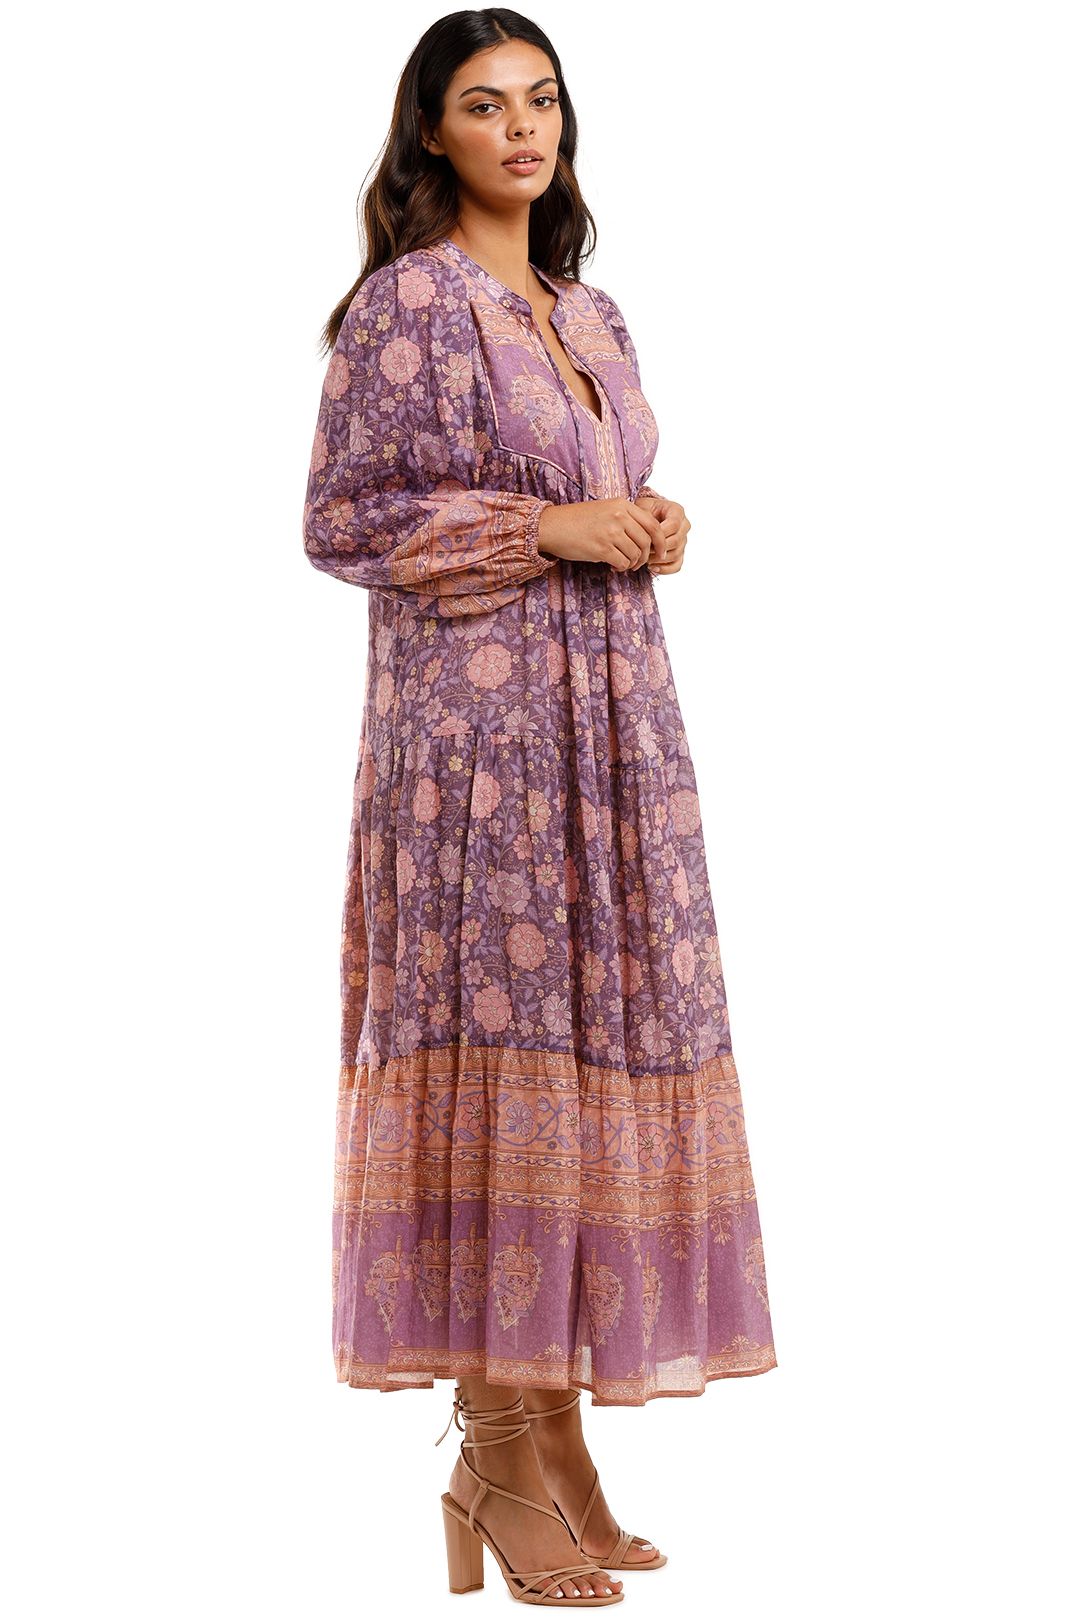 Spell Love Story Gown Royal Lilac Purple Tie Neck